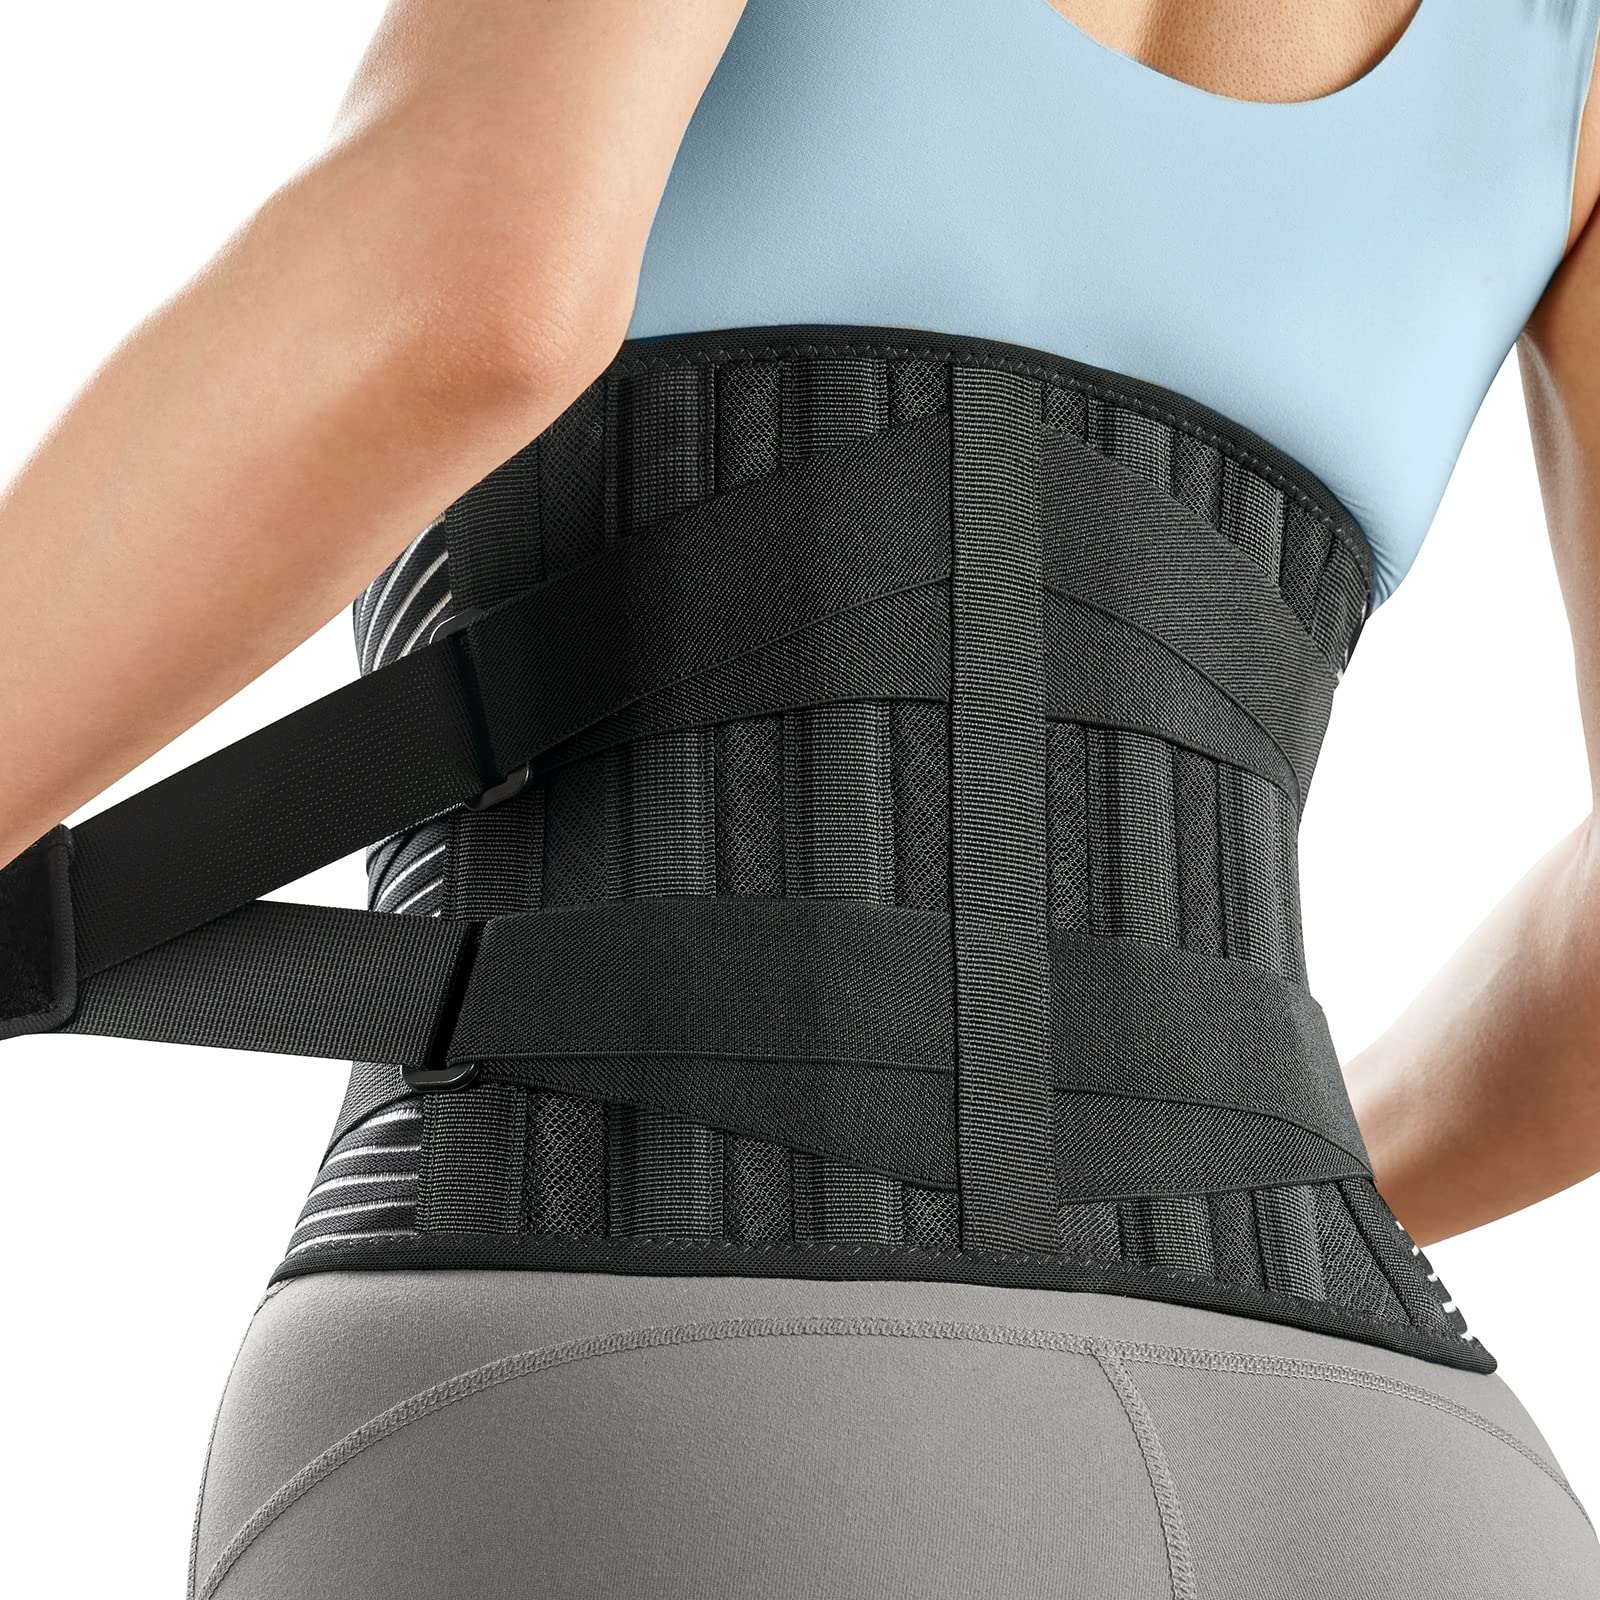 FREETOO Back Brace for Men Women Lower Back Pain Relief with 6